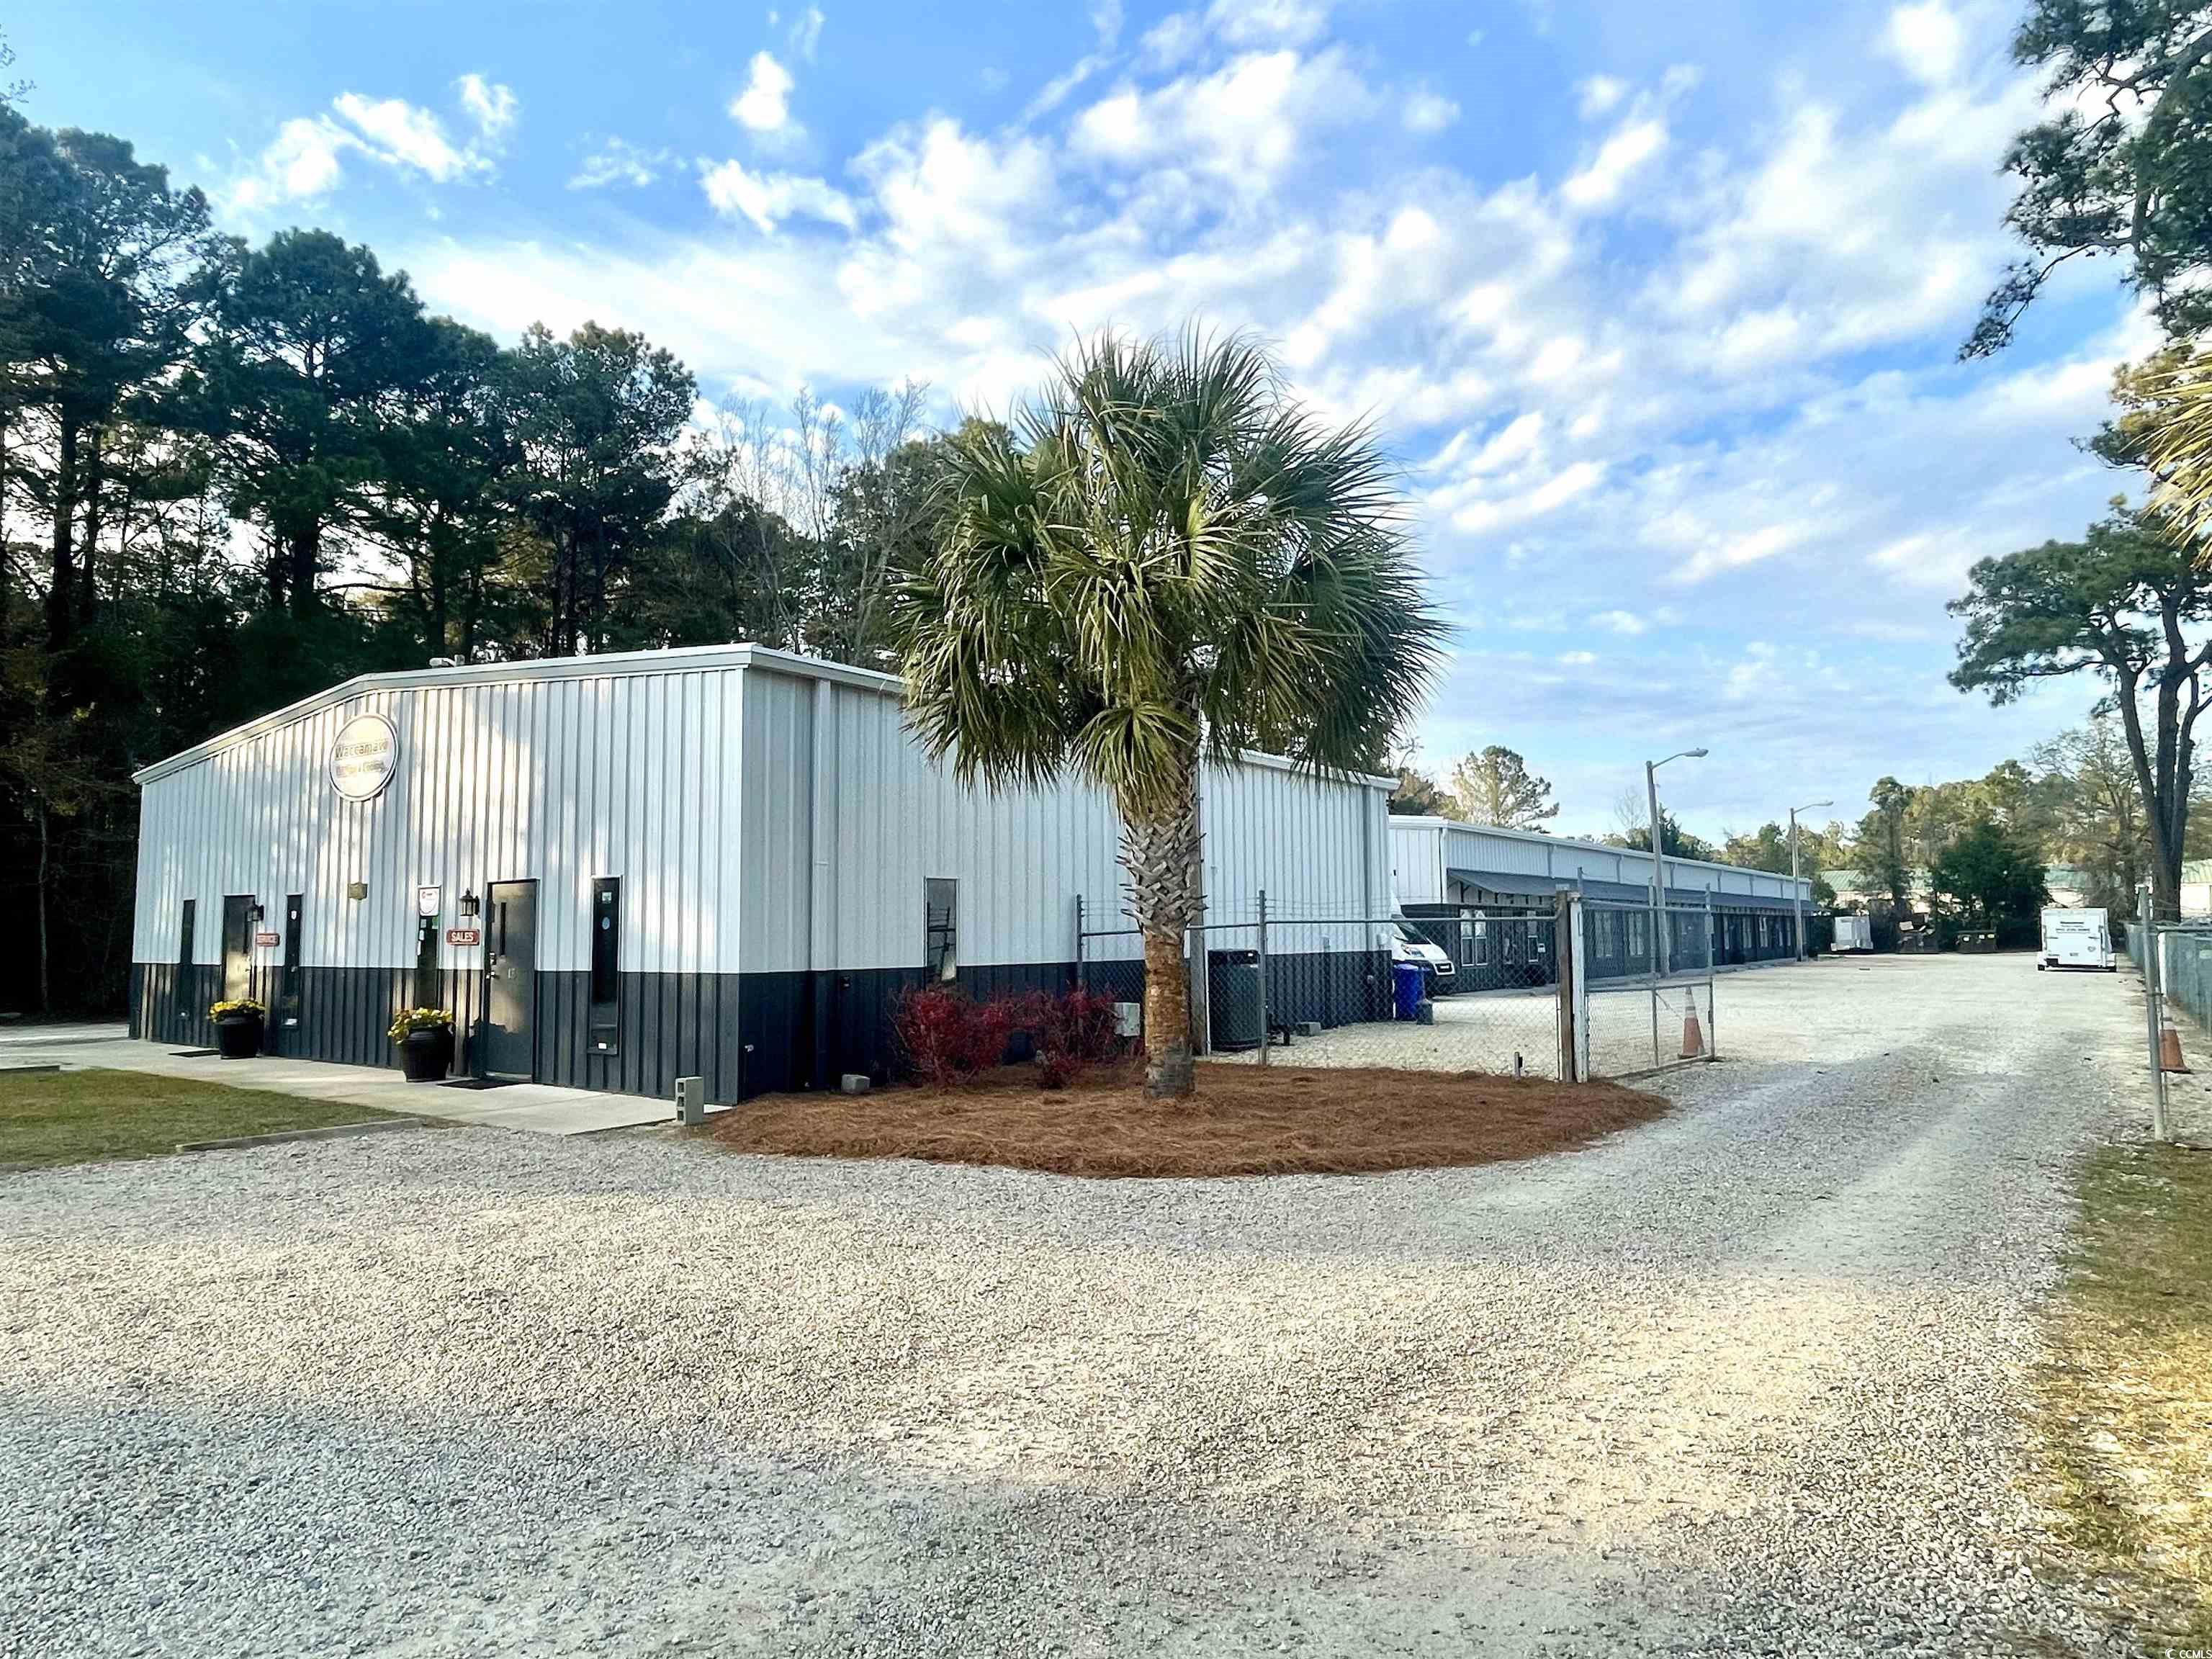 warehouse space in the heart of pawleys island. the property has easy access to highway 17 and is in close proximity to the major retail and residential areas of pawleys. this site is ideal for businesses that service areas from georgetown to myrtle beach. property improvements underway include new exterior paint and landscaping, installation of a new monument sign, branding and way-finding signage, new storefront entryways and roll form awnings, repairing/replacing roofs and roll up doors, and filling holes in gravel driveway. zoning: resort service, county of georgetown, sc.  industrial space up to 14,810 sf coming available soon.